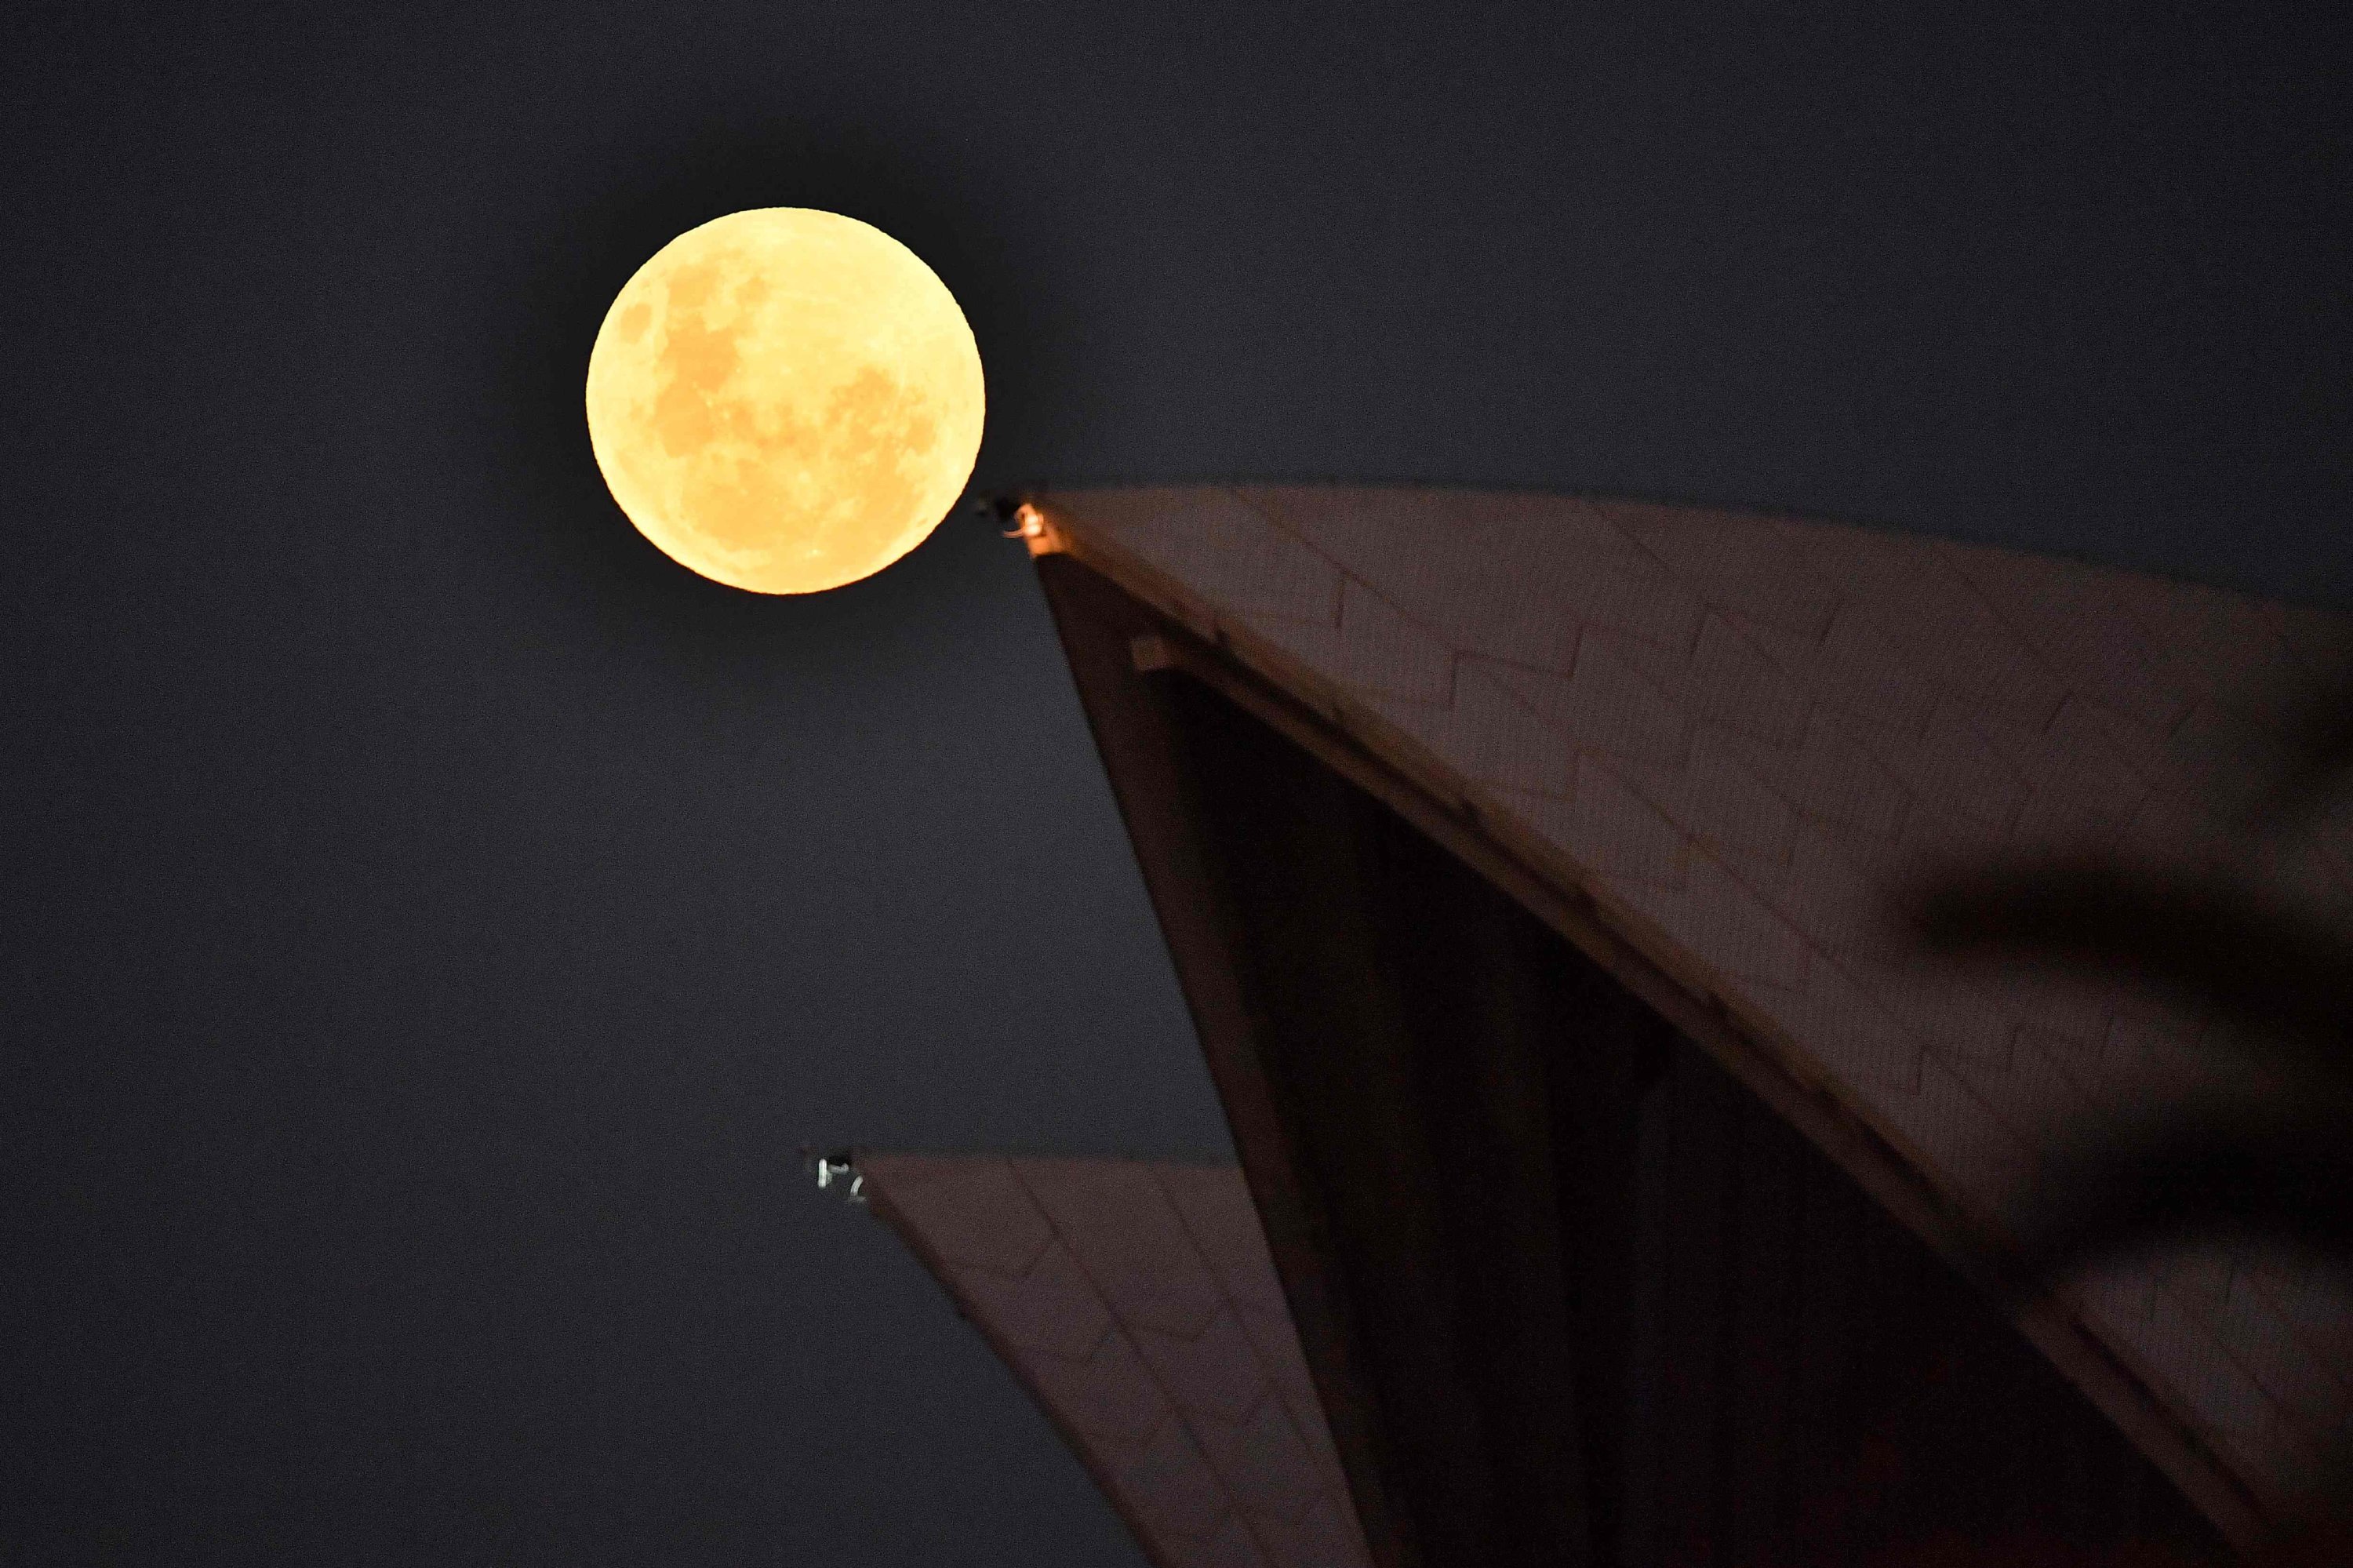 The Moon – ahead of a super blood moon total lunar eclipse that will be visible to stargazers across the Pacific – rises over the Opera House in Sydney, Australia, May 26, 2021. (AFP Photo)